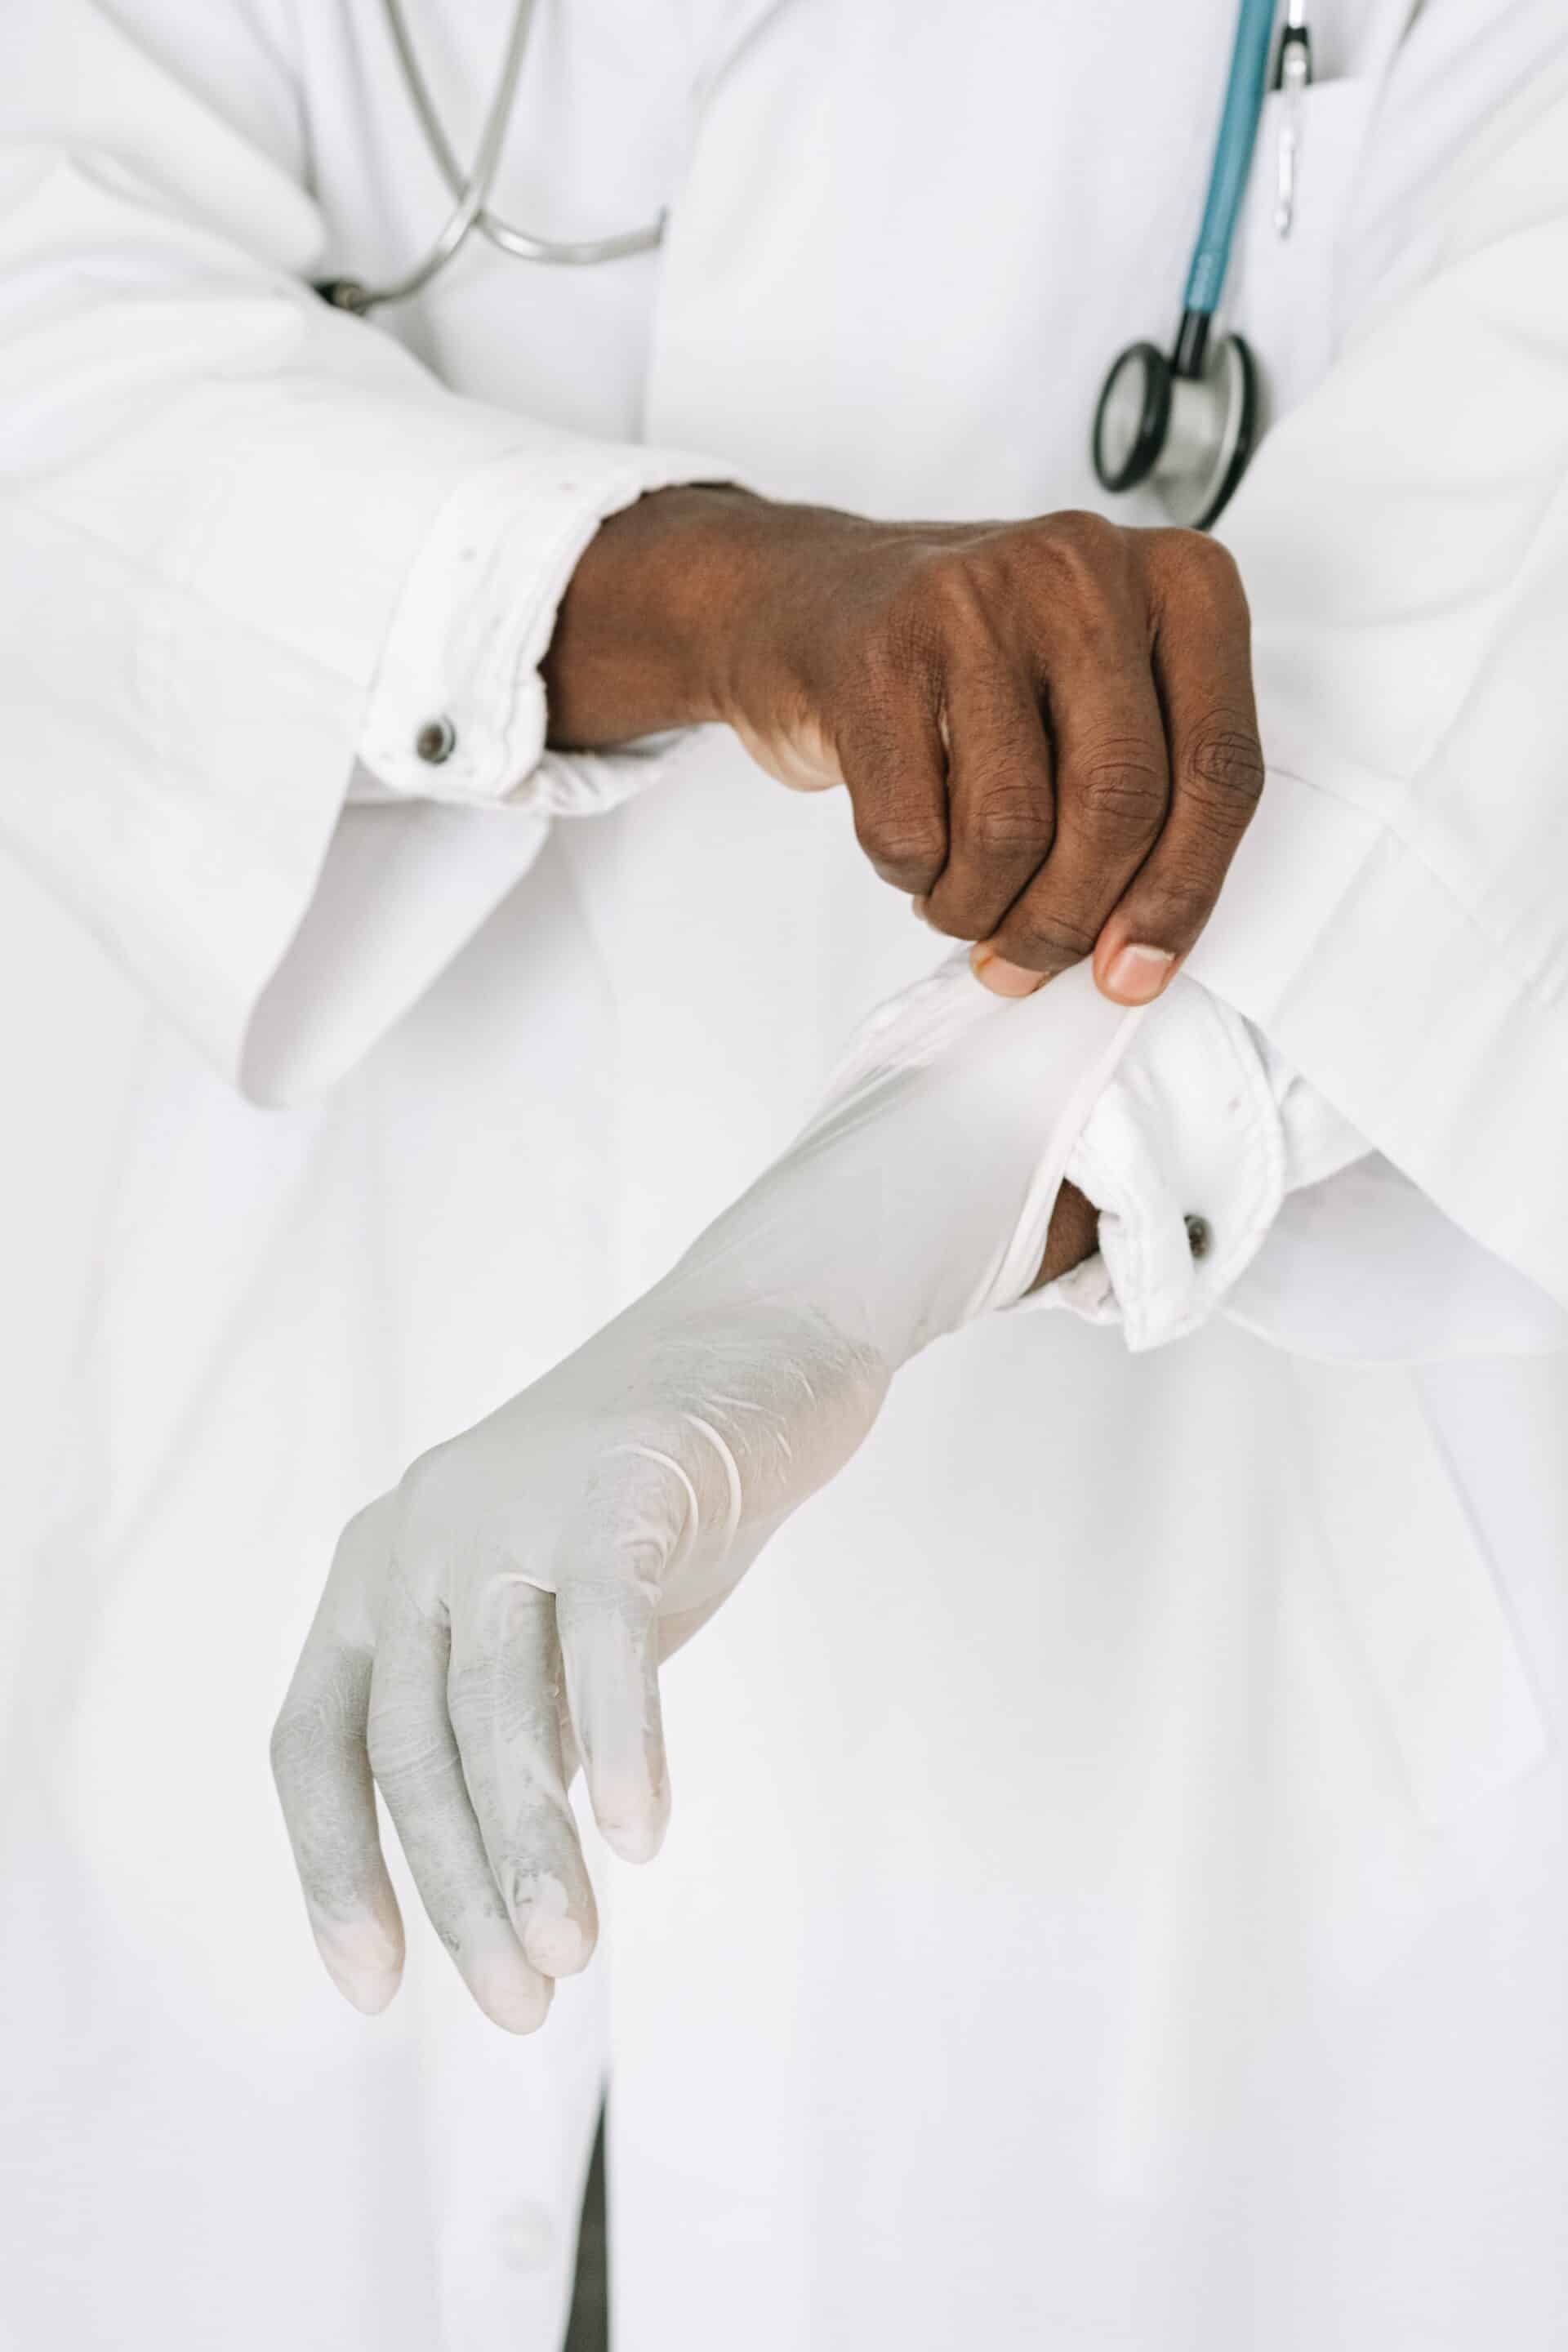 Specialised White glove service